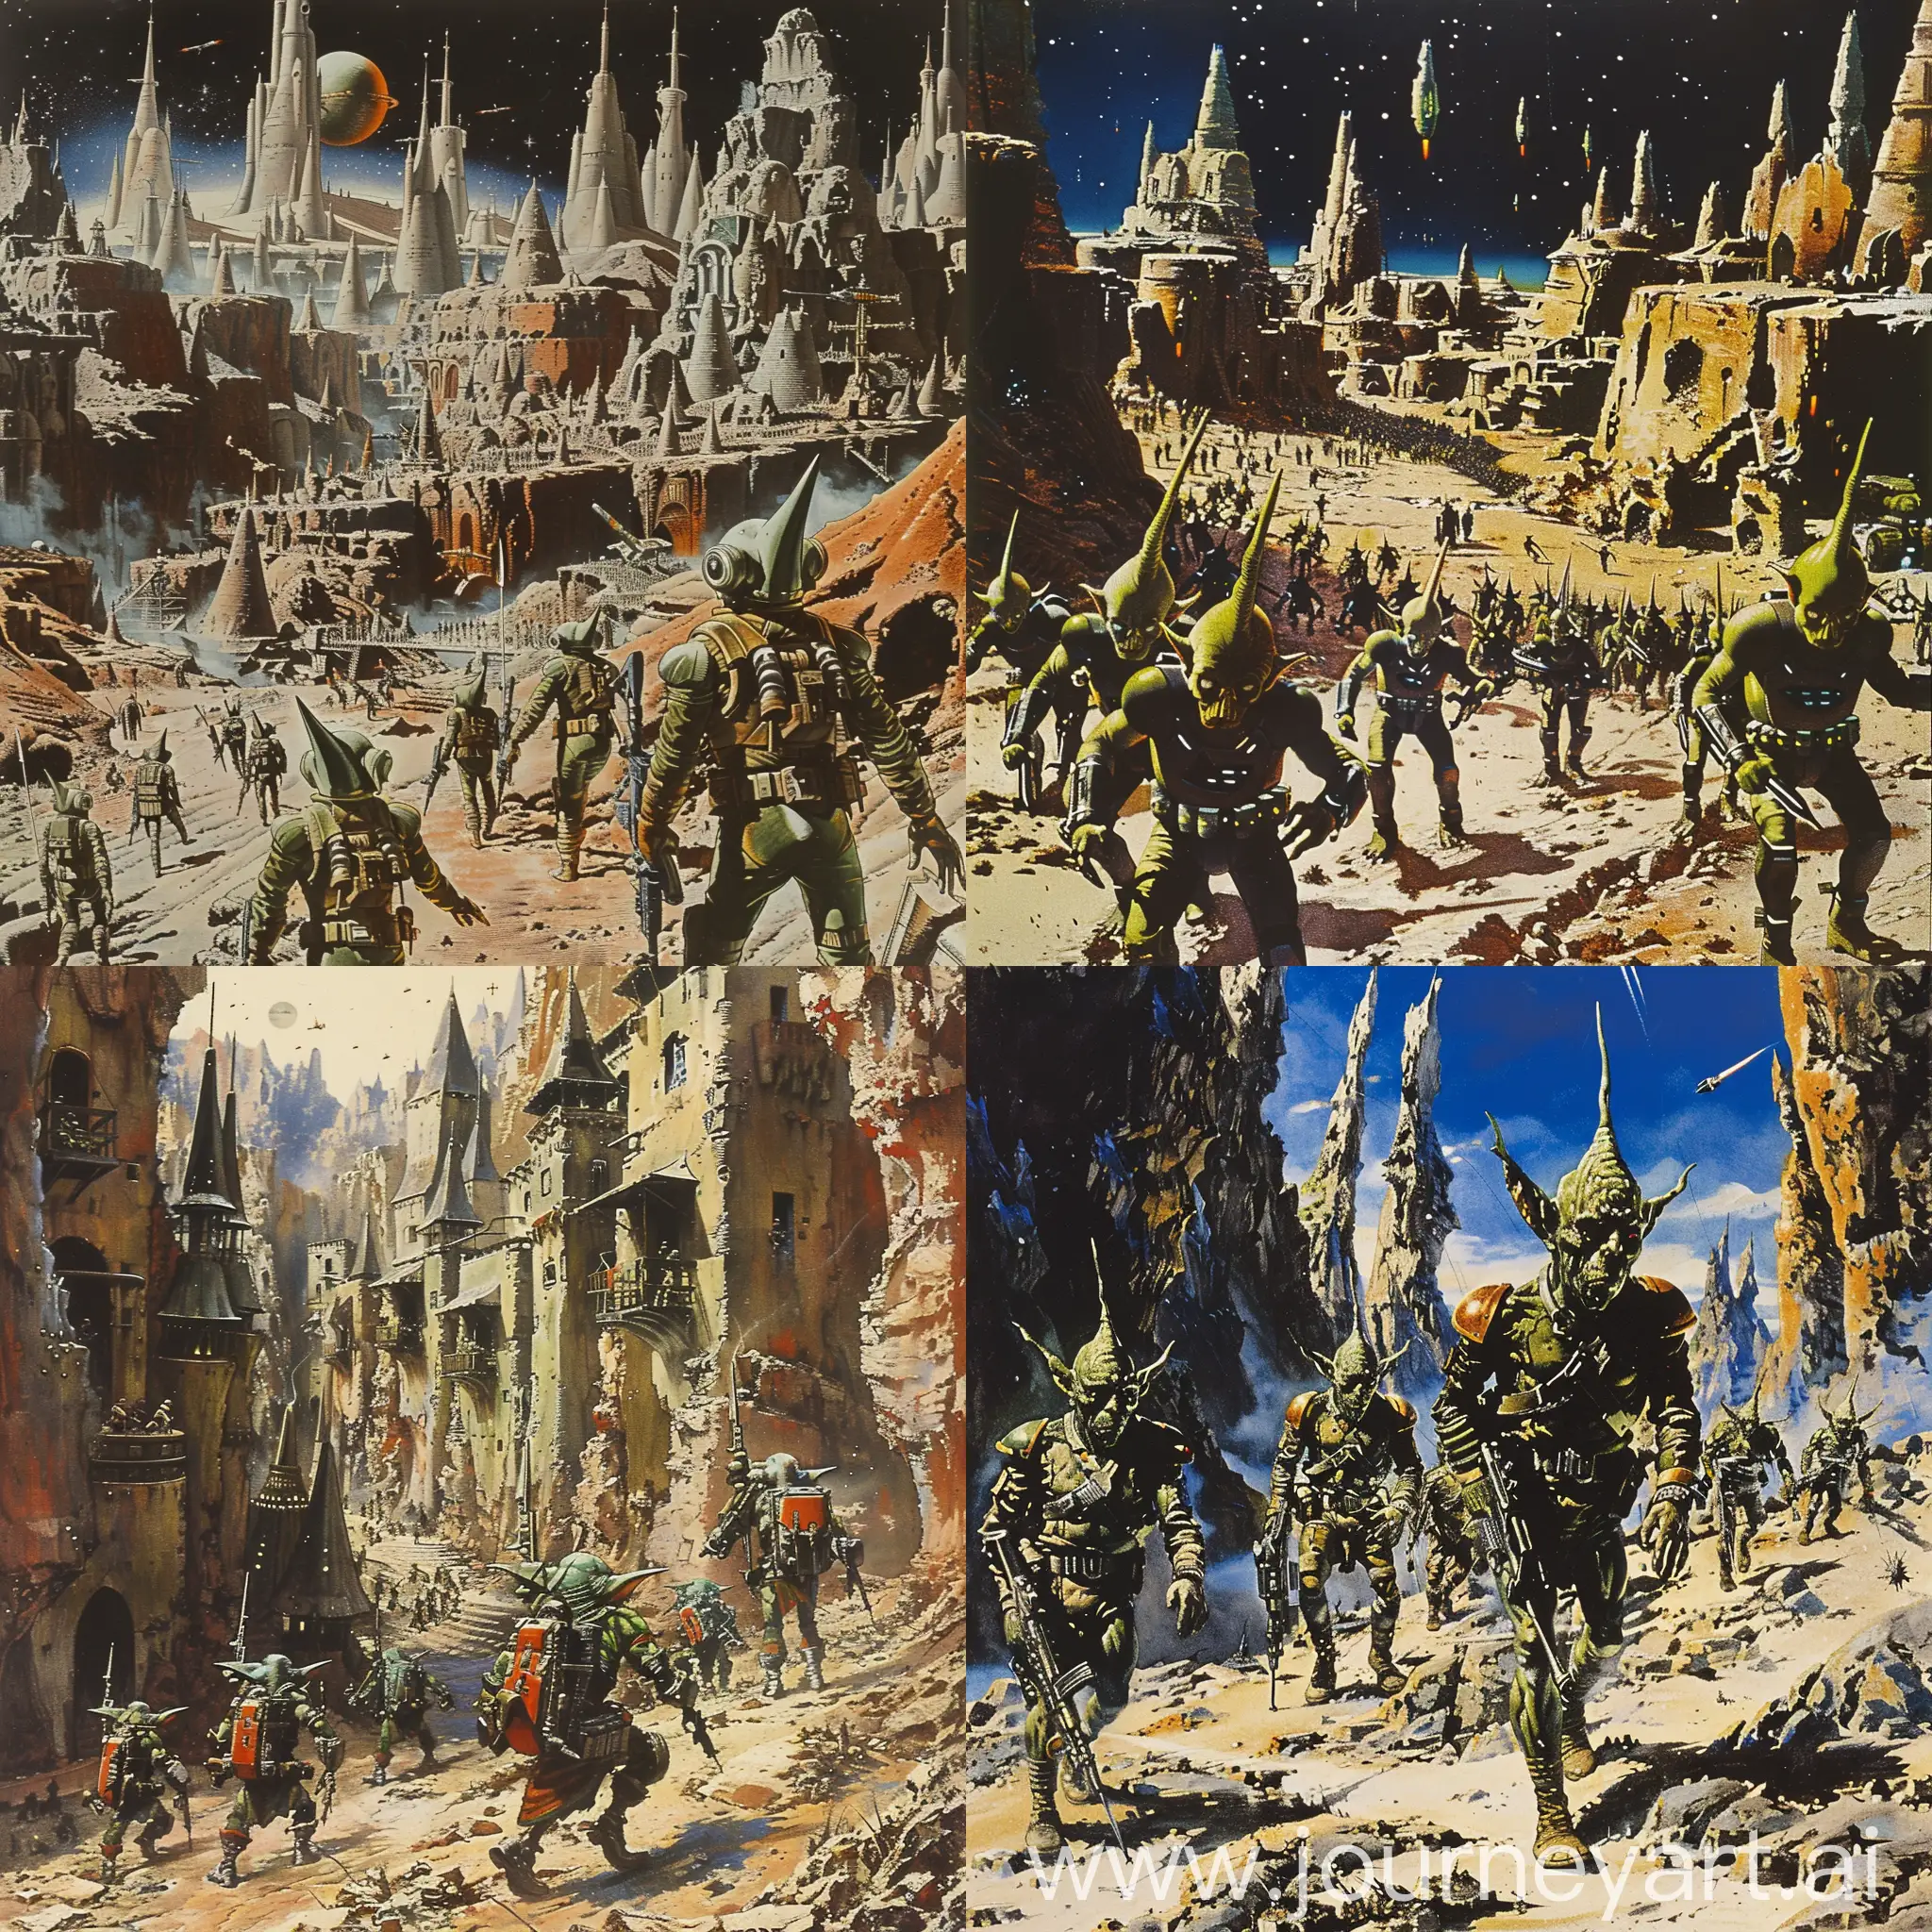 Futuristic-Armed-Invasion-Soldiers-Destroying-Villages-on-a-Green-Alien-Planet